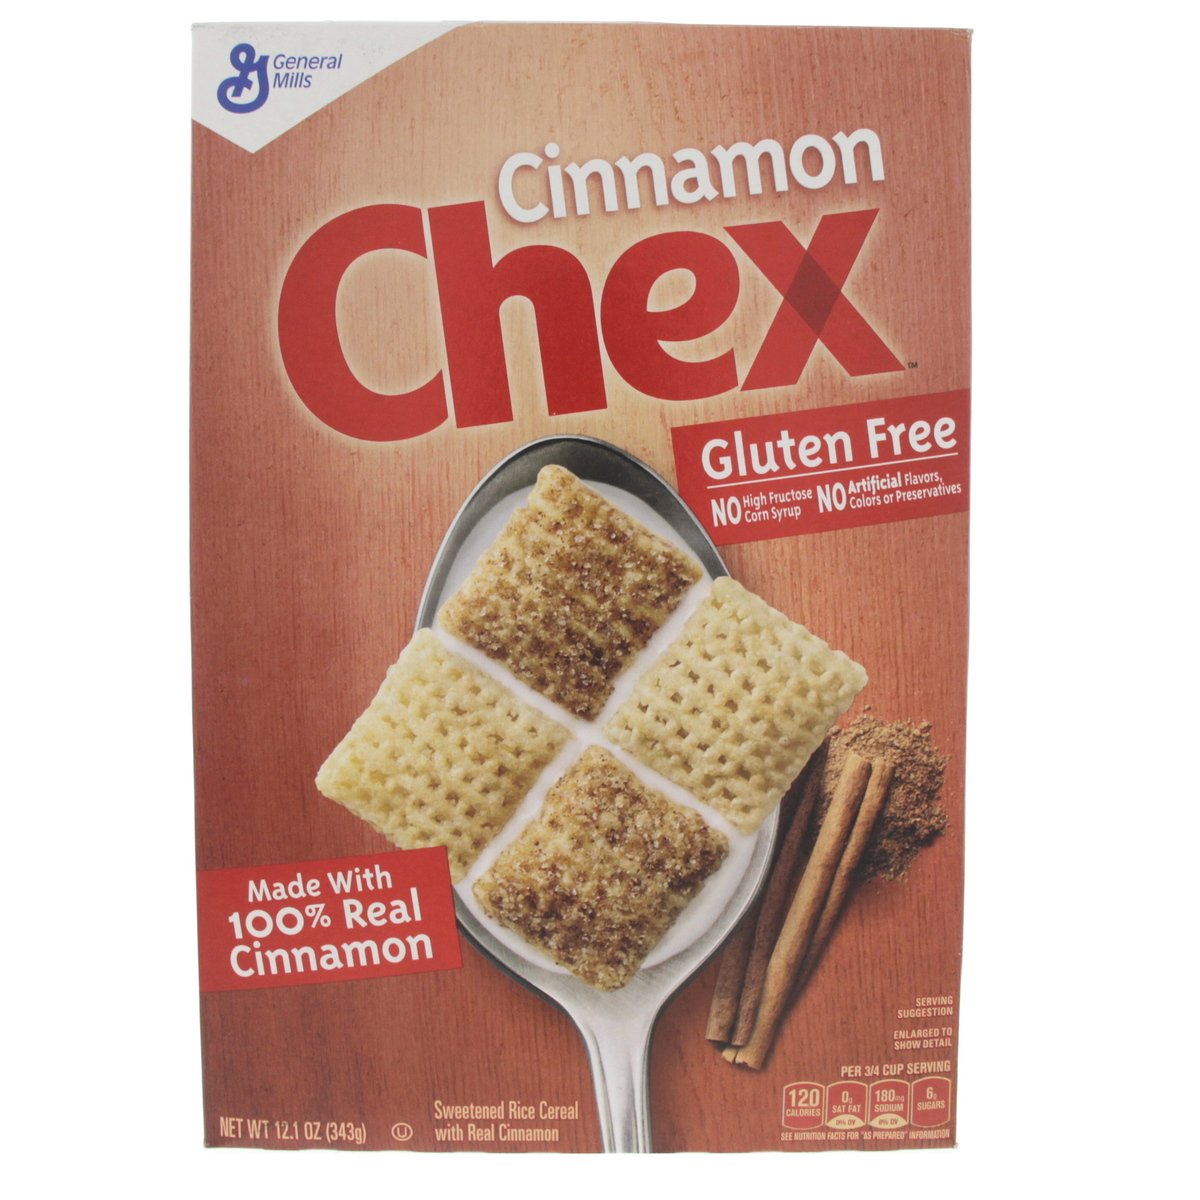 General Mills Cinnamon Chex Sweetened Rice Cereal 343 g